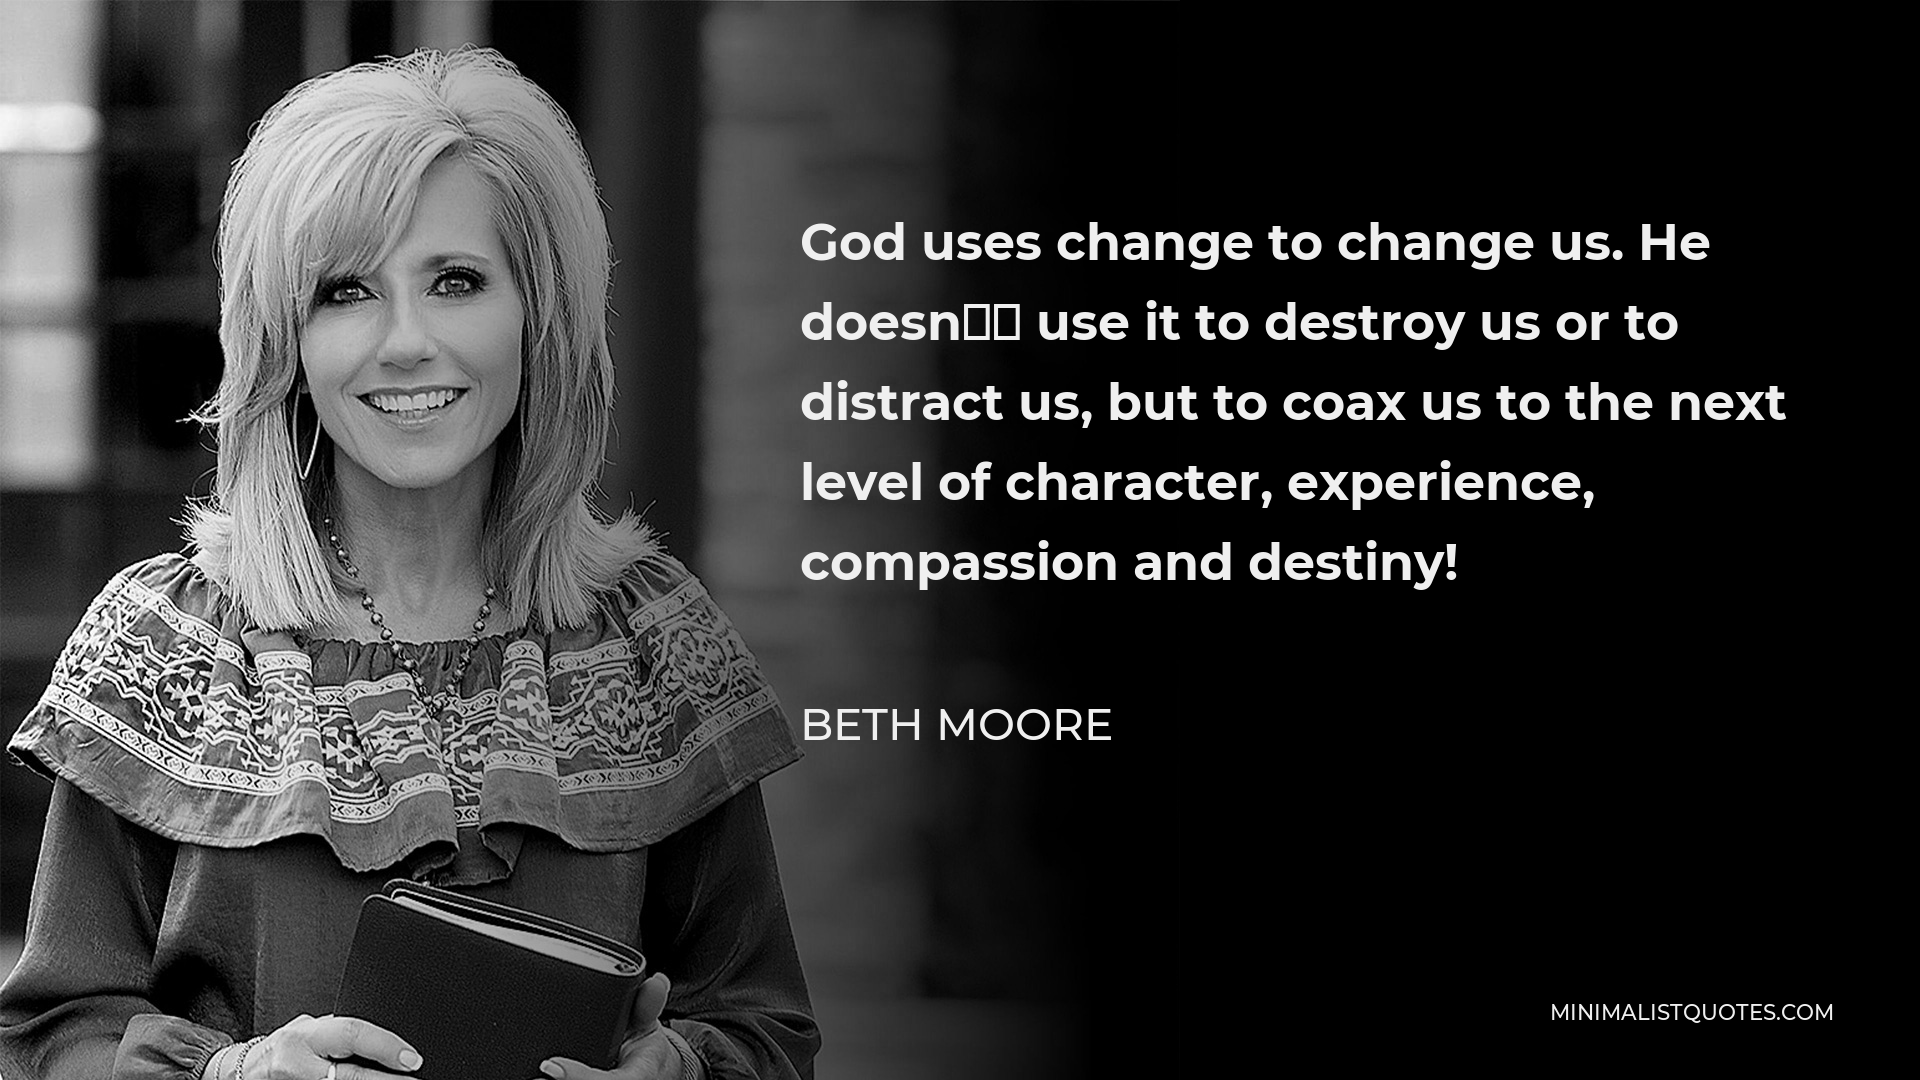 Beth Moore Quote - God uses change to change us. He doesn’t use it to destroy us or to distract us, but to coax us to the next level of character, experience, compassion and destiny!